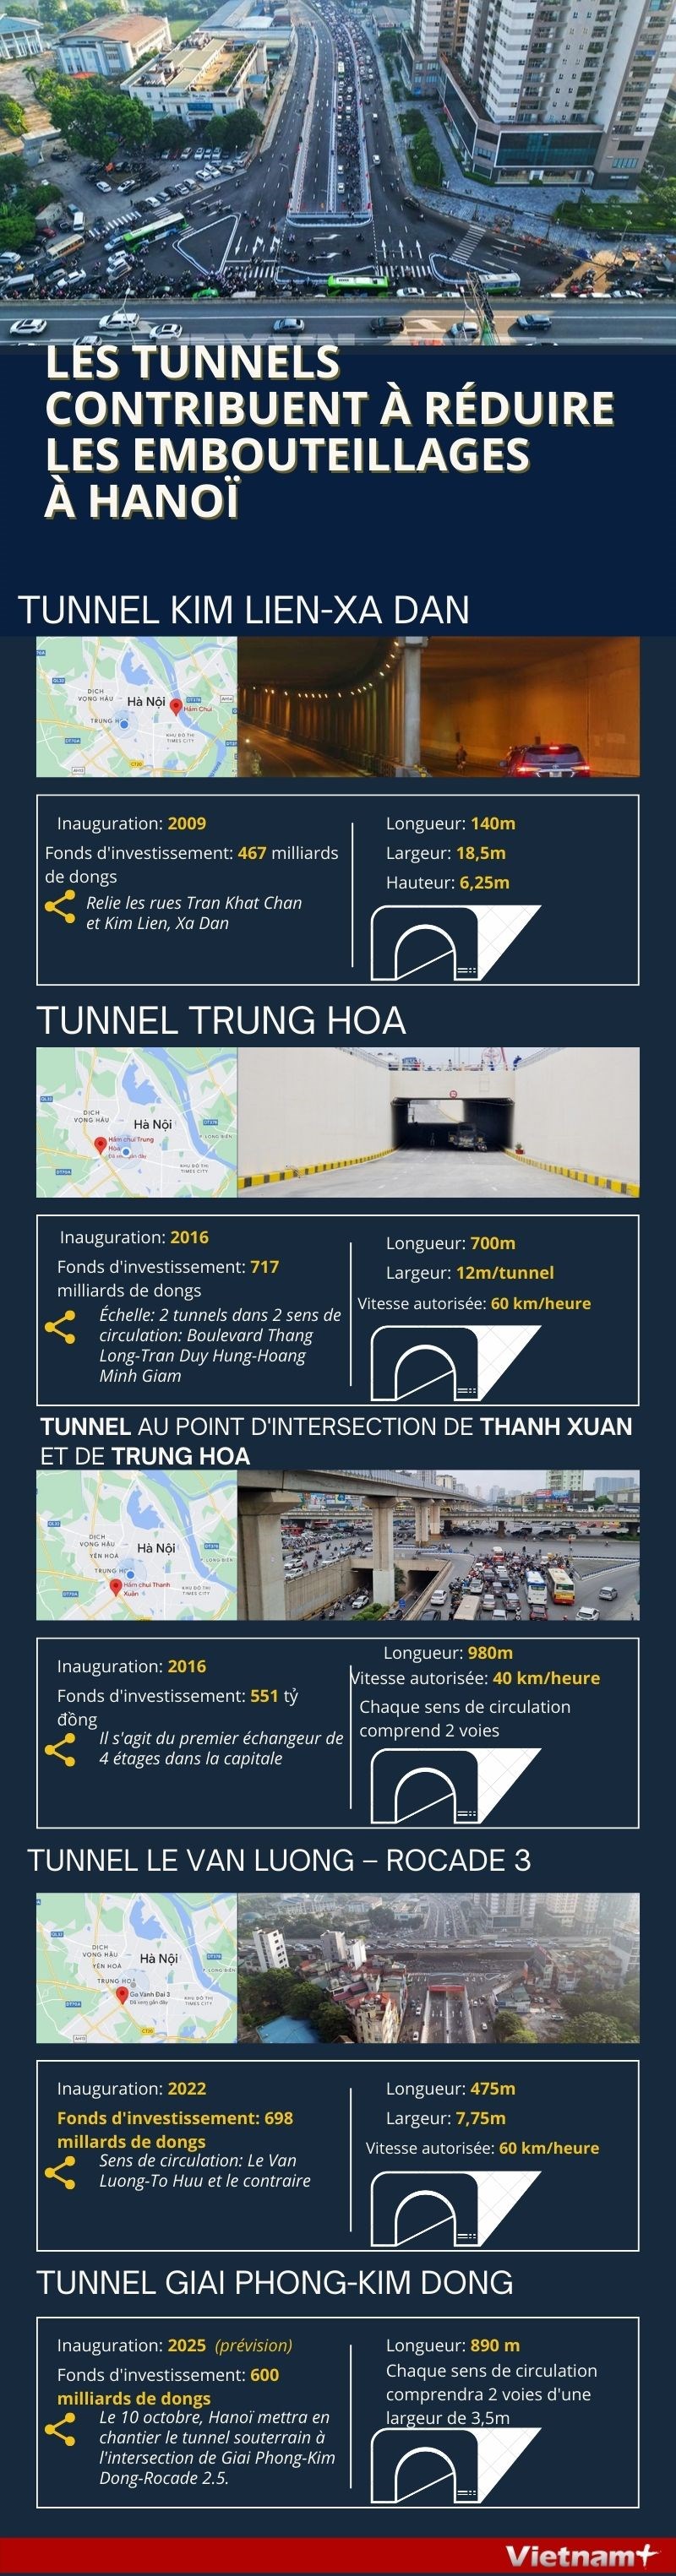 Les tunnels contribuent a reduire les embouteillages a Hanoi hinh anh 1